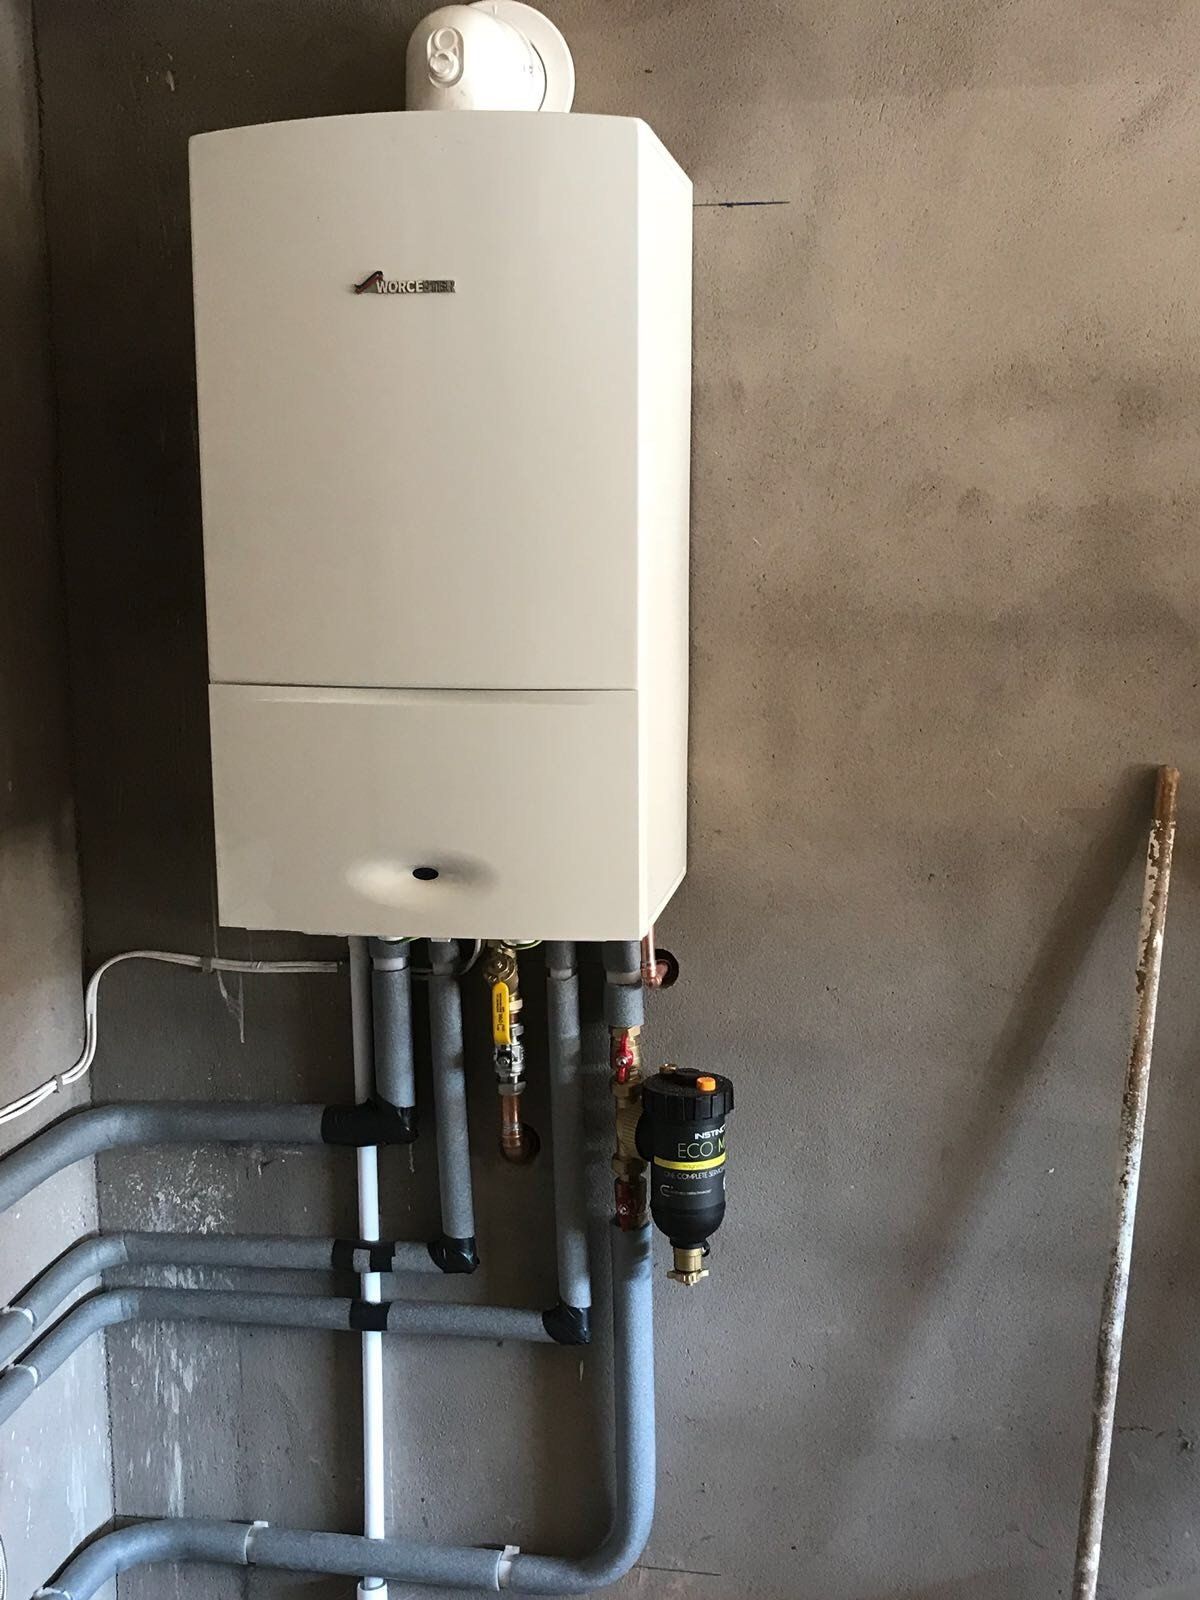 An efficient boiler installed in a room, featuring modern controls and safety features.